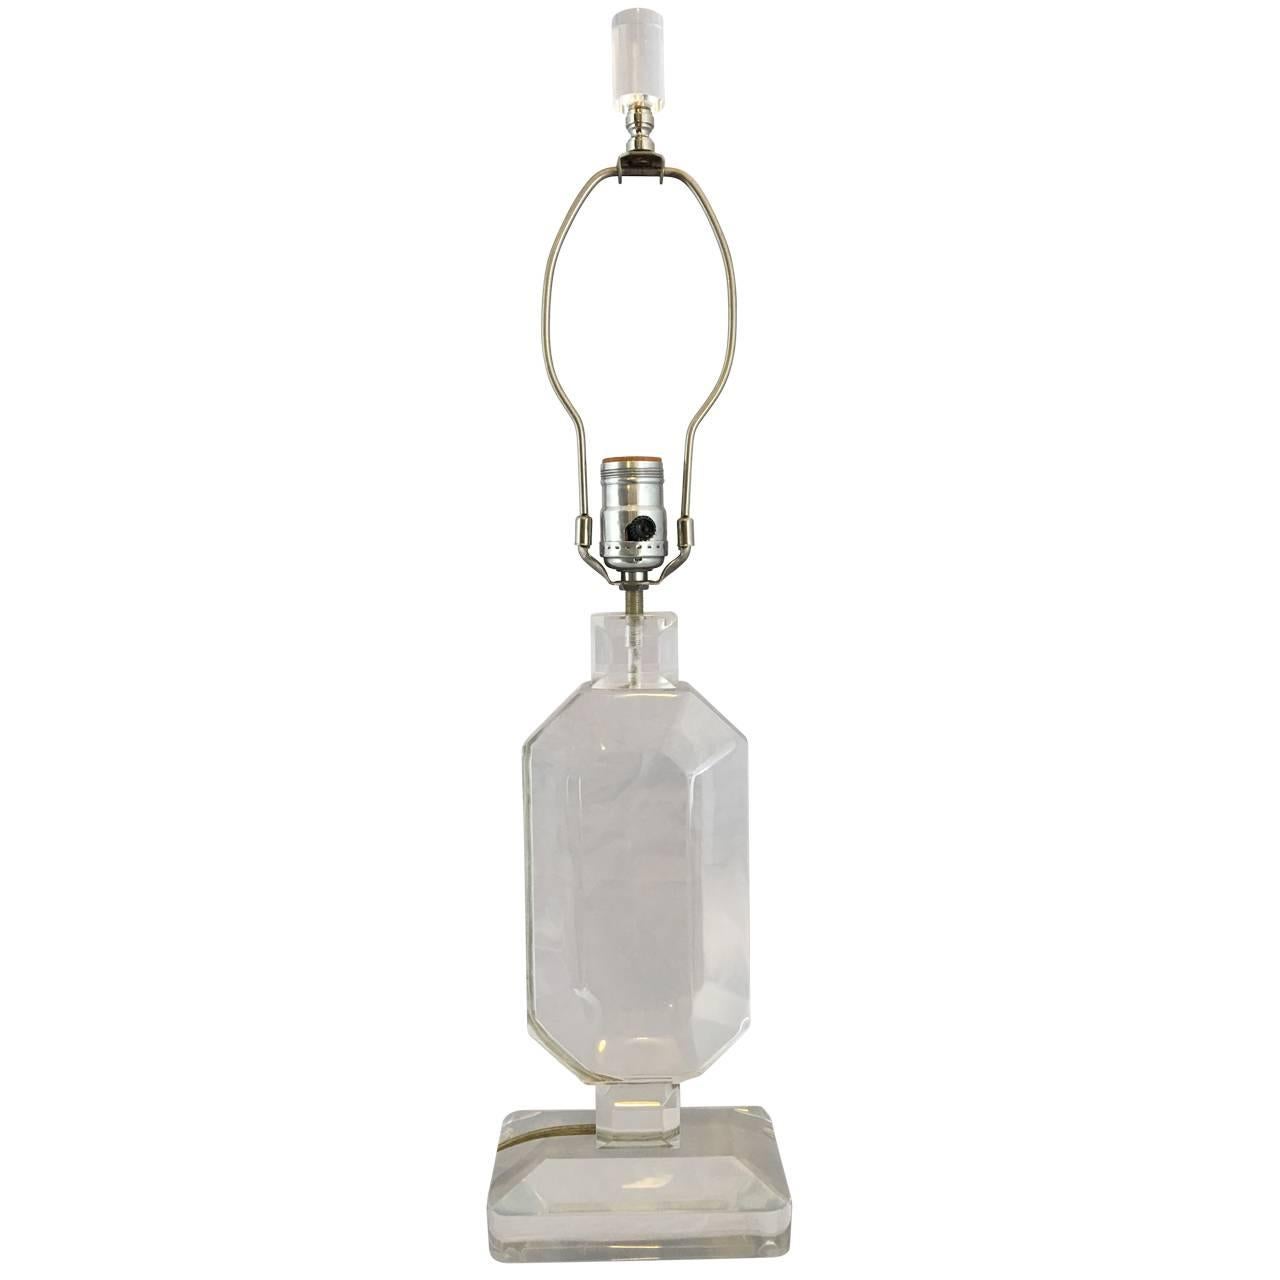 Single lucite table lamp with lucite finial